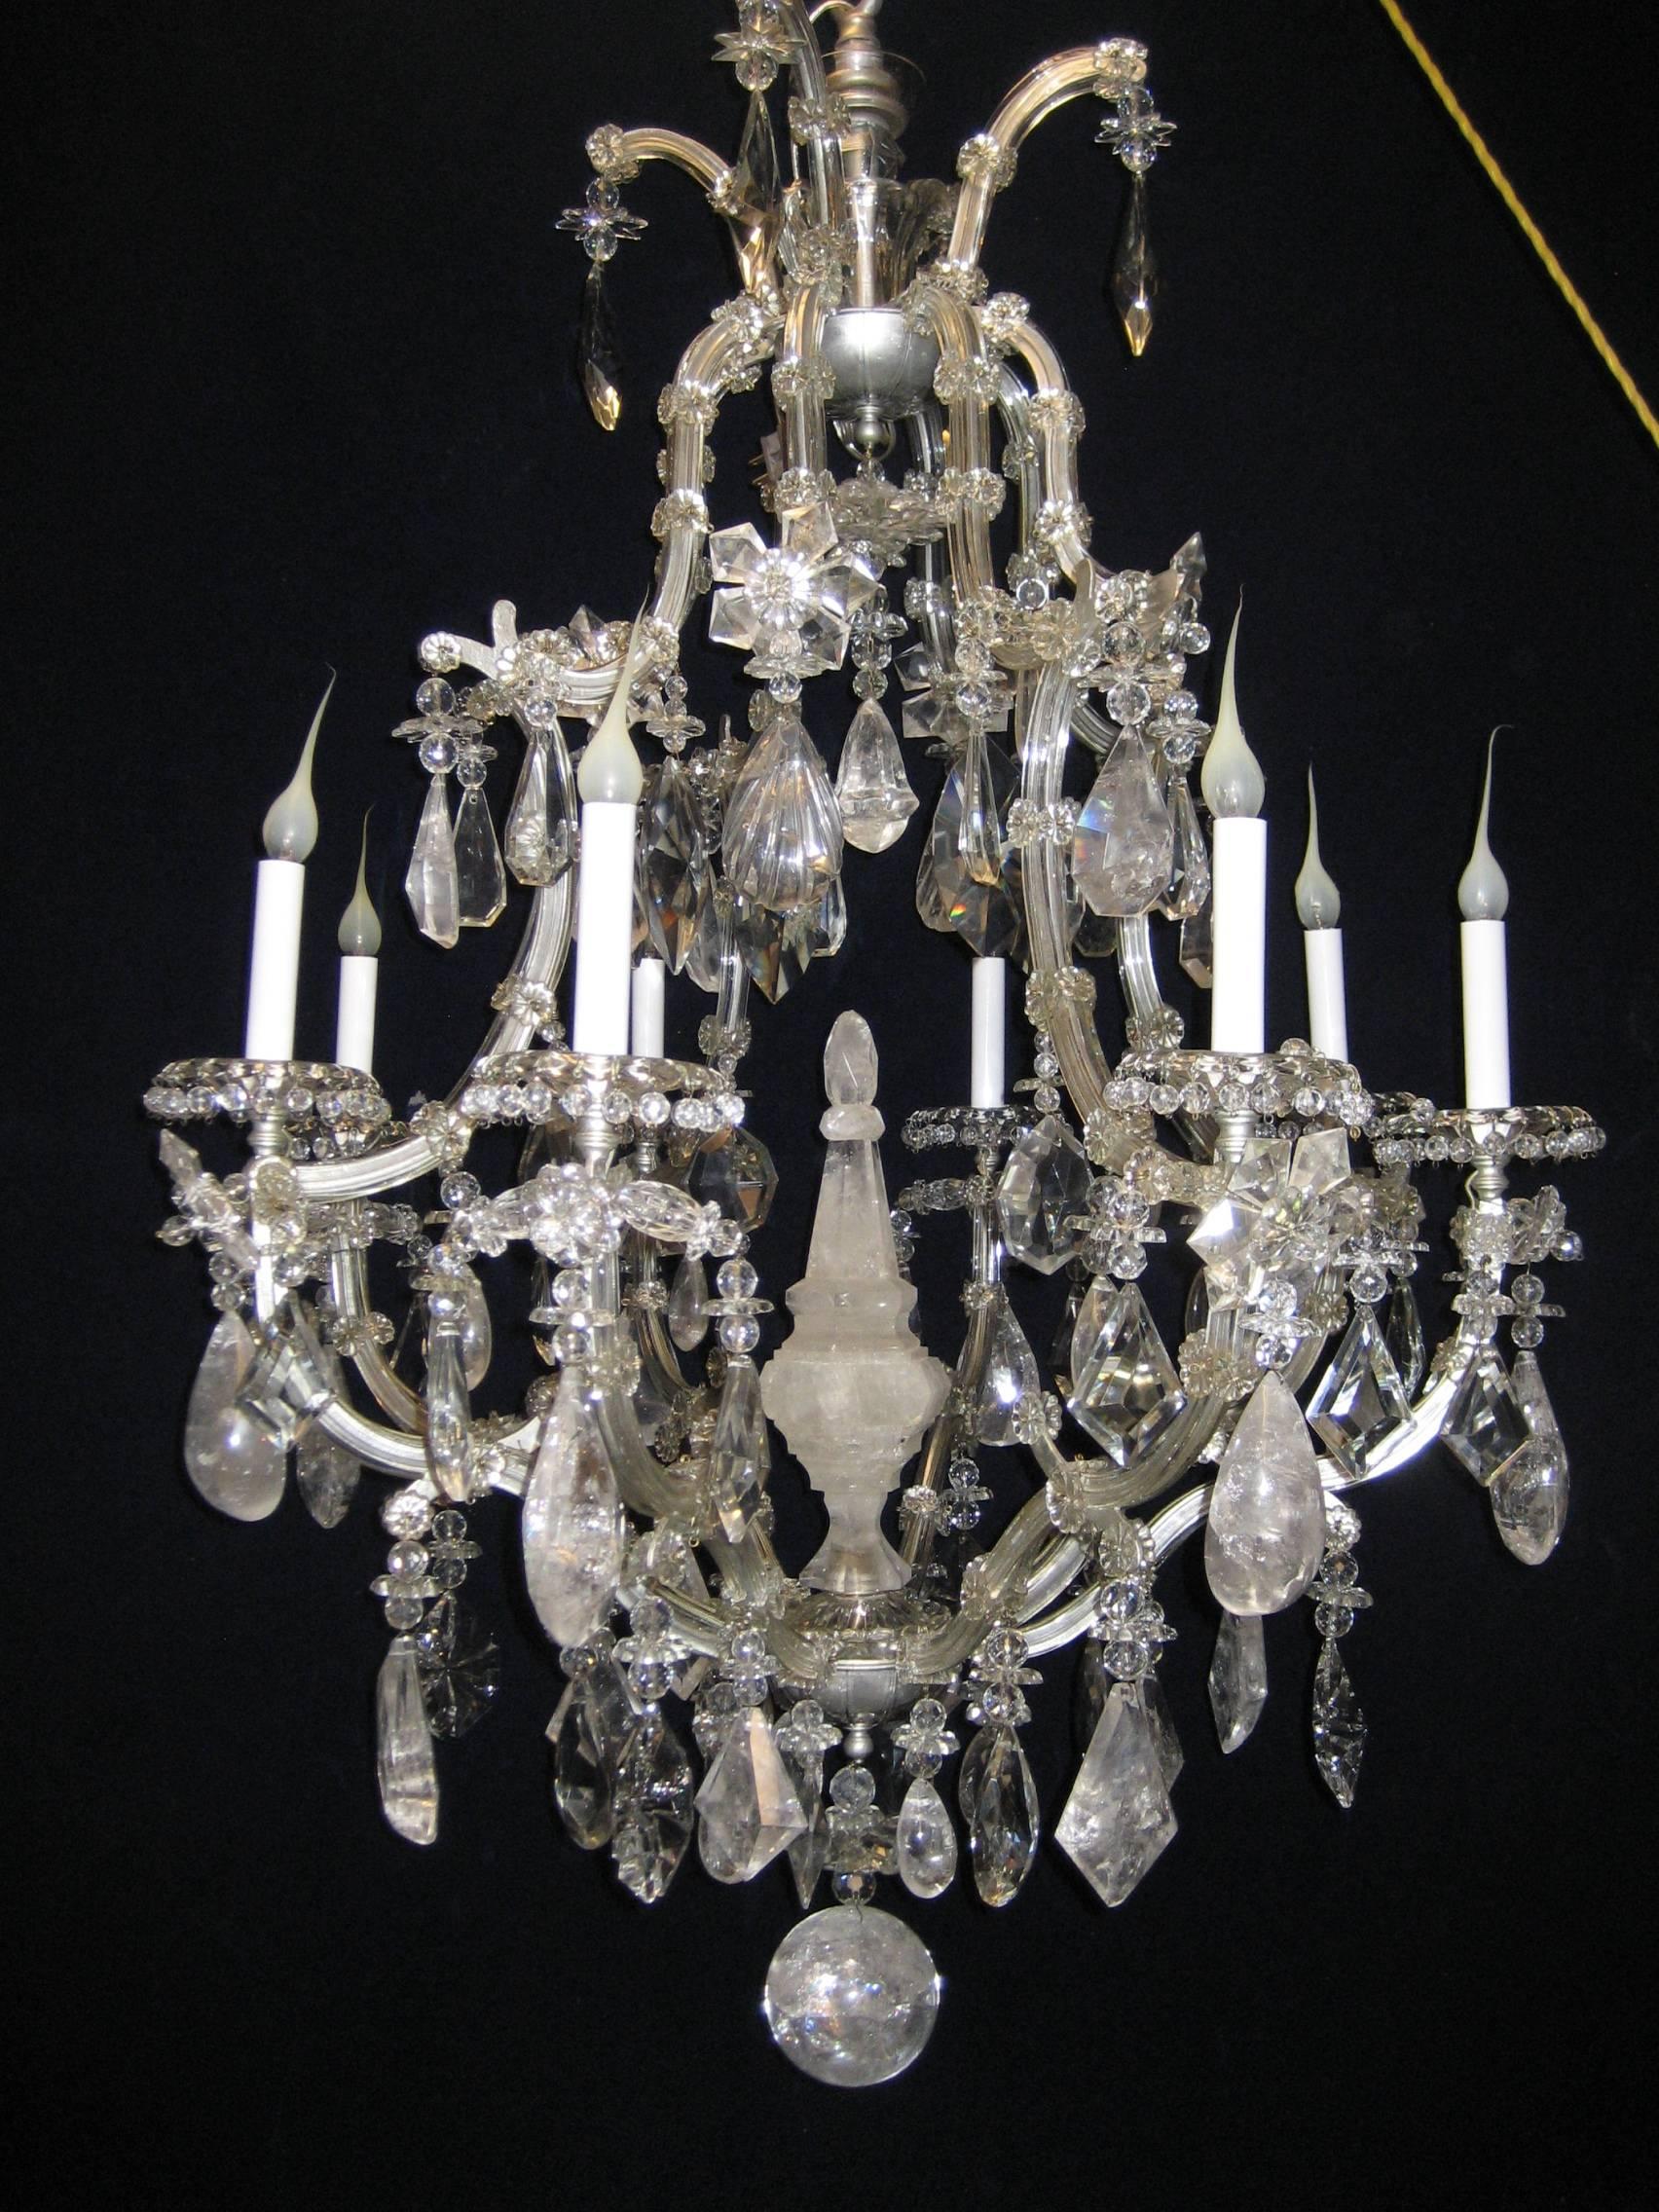 A fine large antique French Louis XVI style silvered bronze, cut rock crystal, glass and crystal multi light cage form chandelier of great detail embellished with cut rock crystal prisms, glass arms, crystal prisms, cut rock crystal flowers and